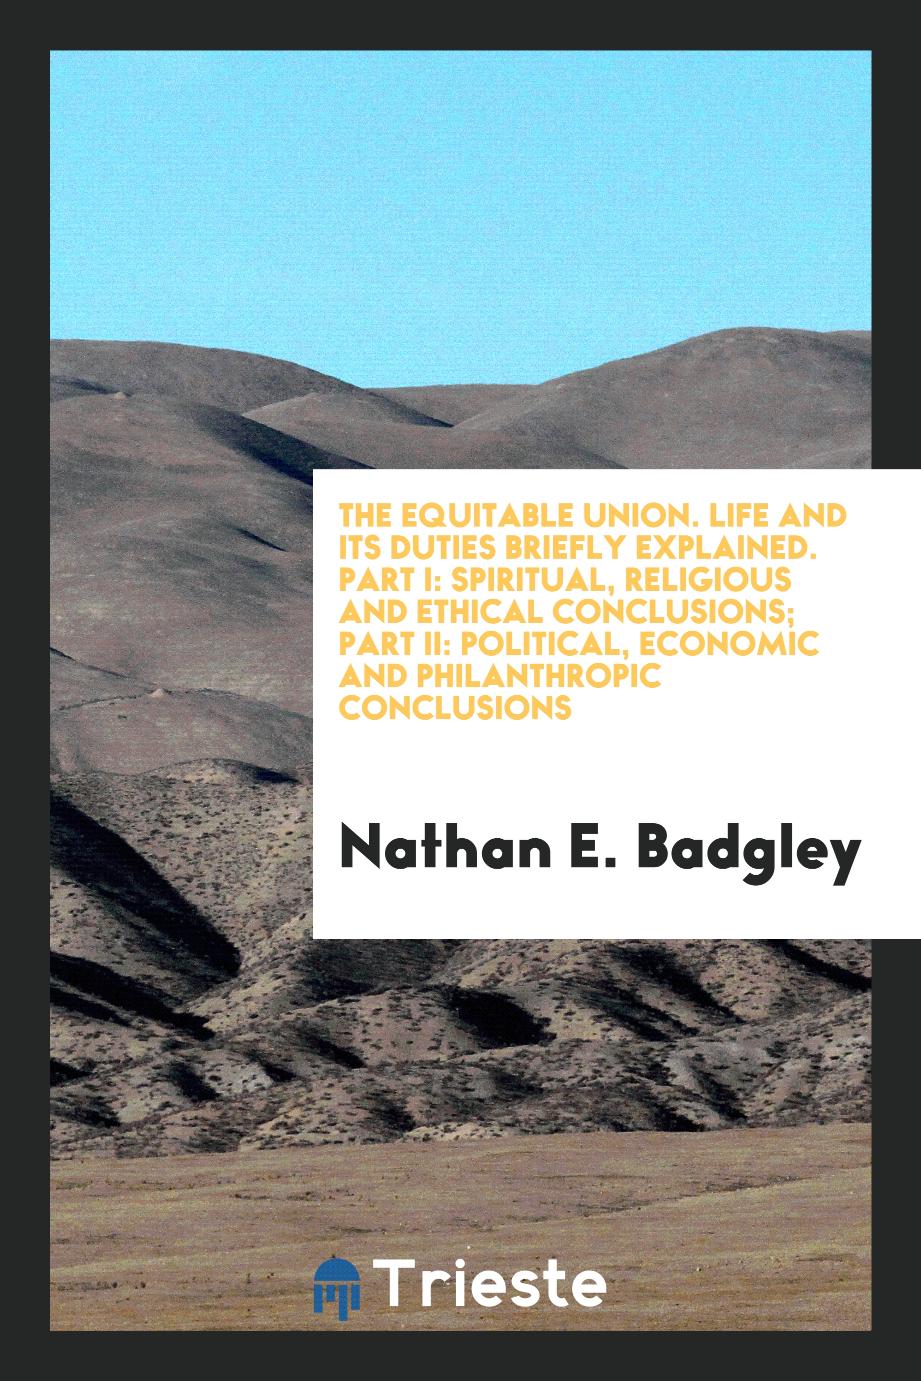 Nathan E. Badgley - The Equitable Union. Life and Its Duties Briefly Explained. Part I: Spiritual, Religious and Ethical Conclusions; Part II: Political, Economic and Philanthropic Conclusions